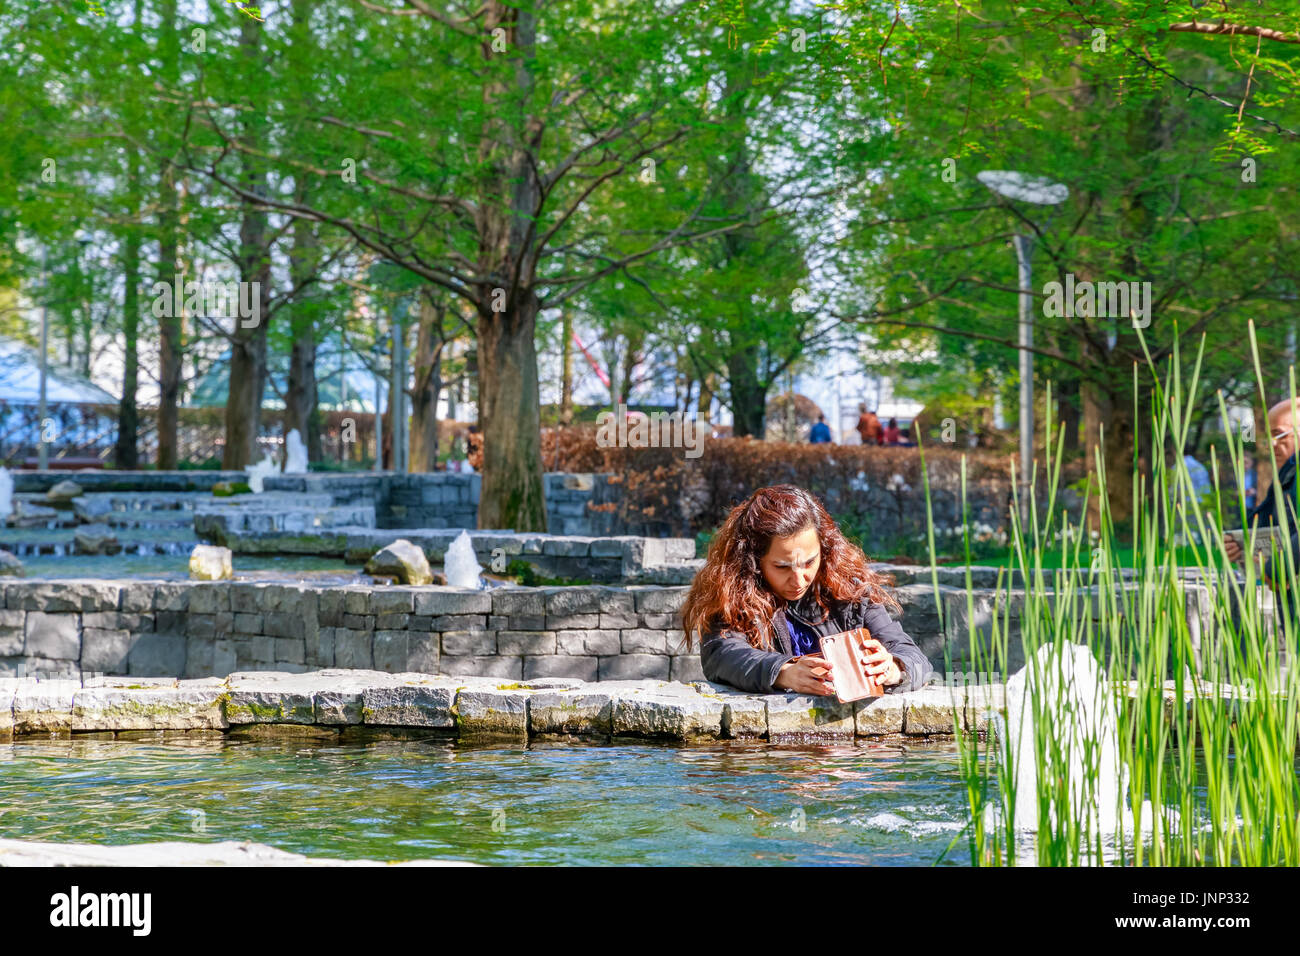 London, UK - May 10, 2017 - A woman taking pictures in Jubilee Park, a landscaped space in Canary Wharf Stock Photo